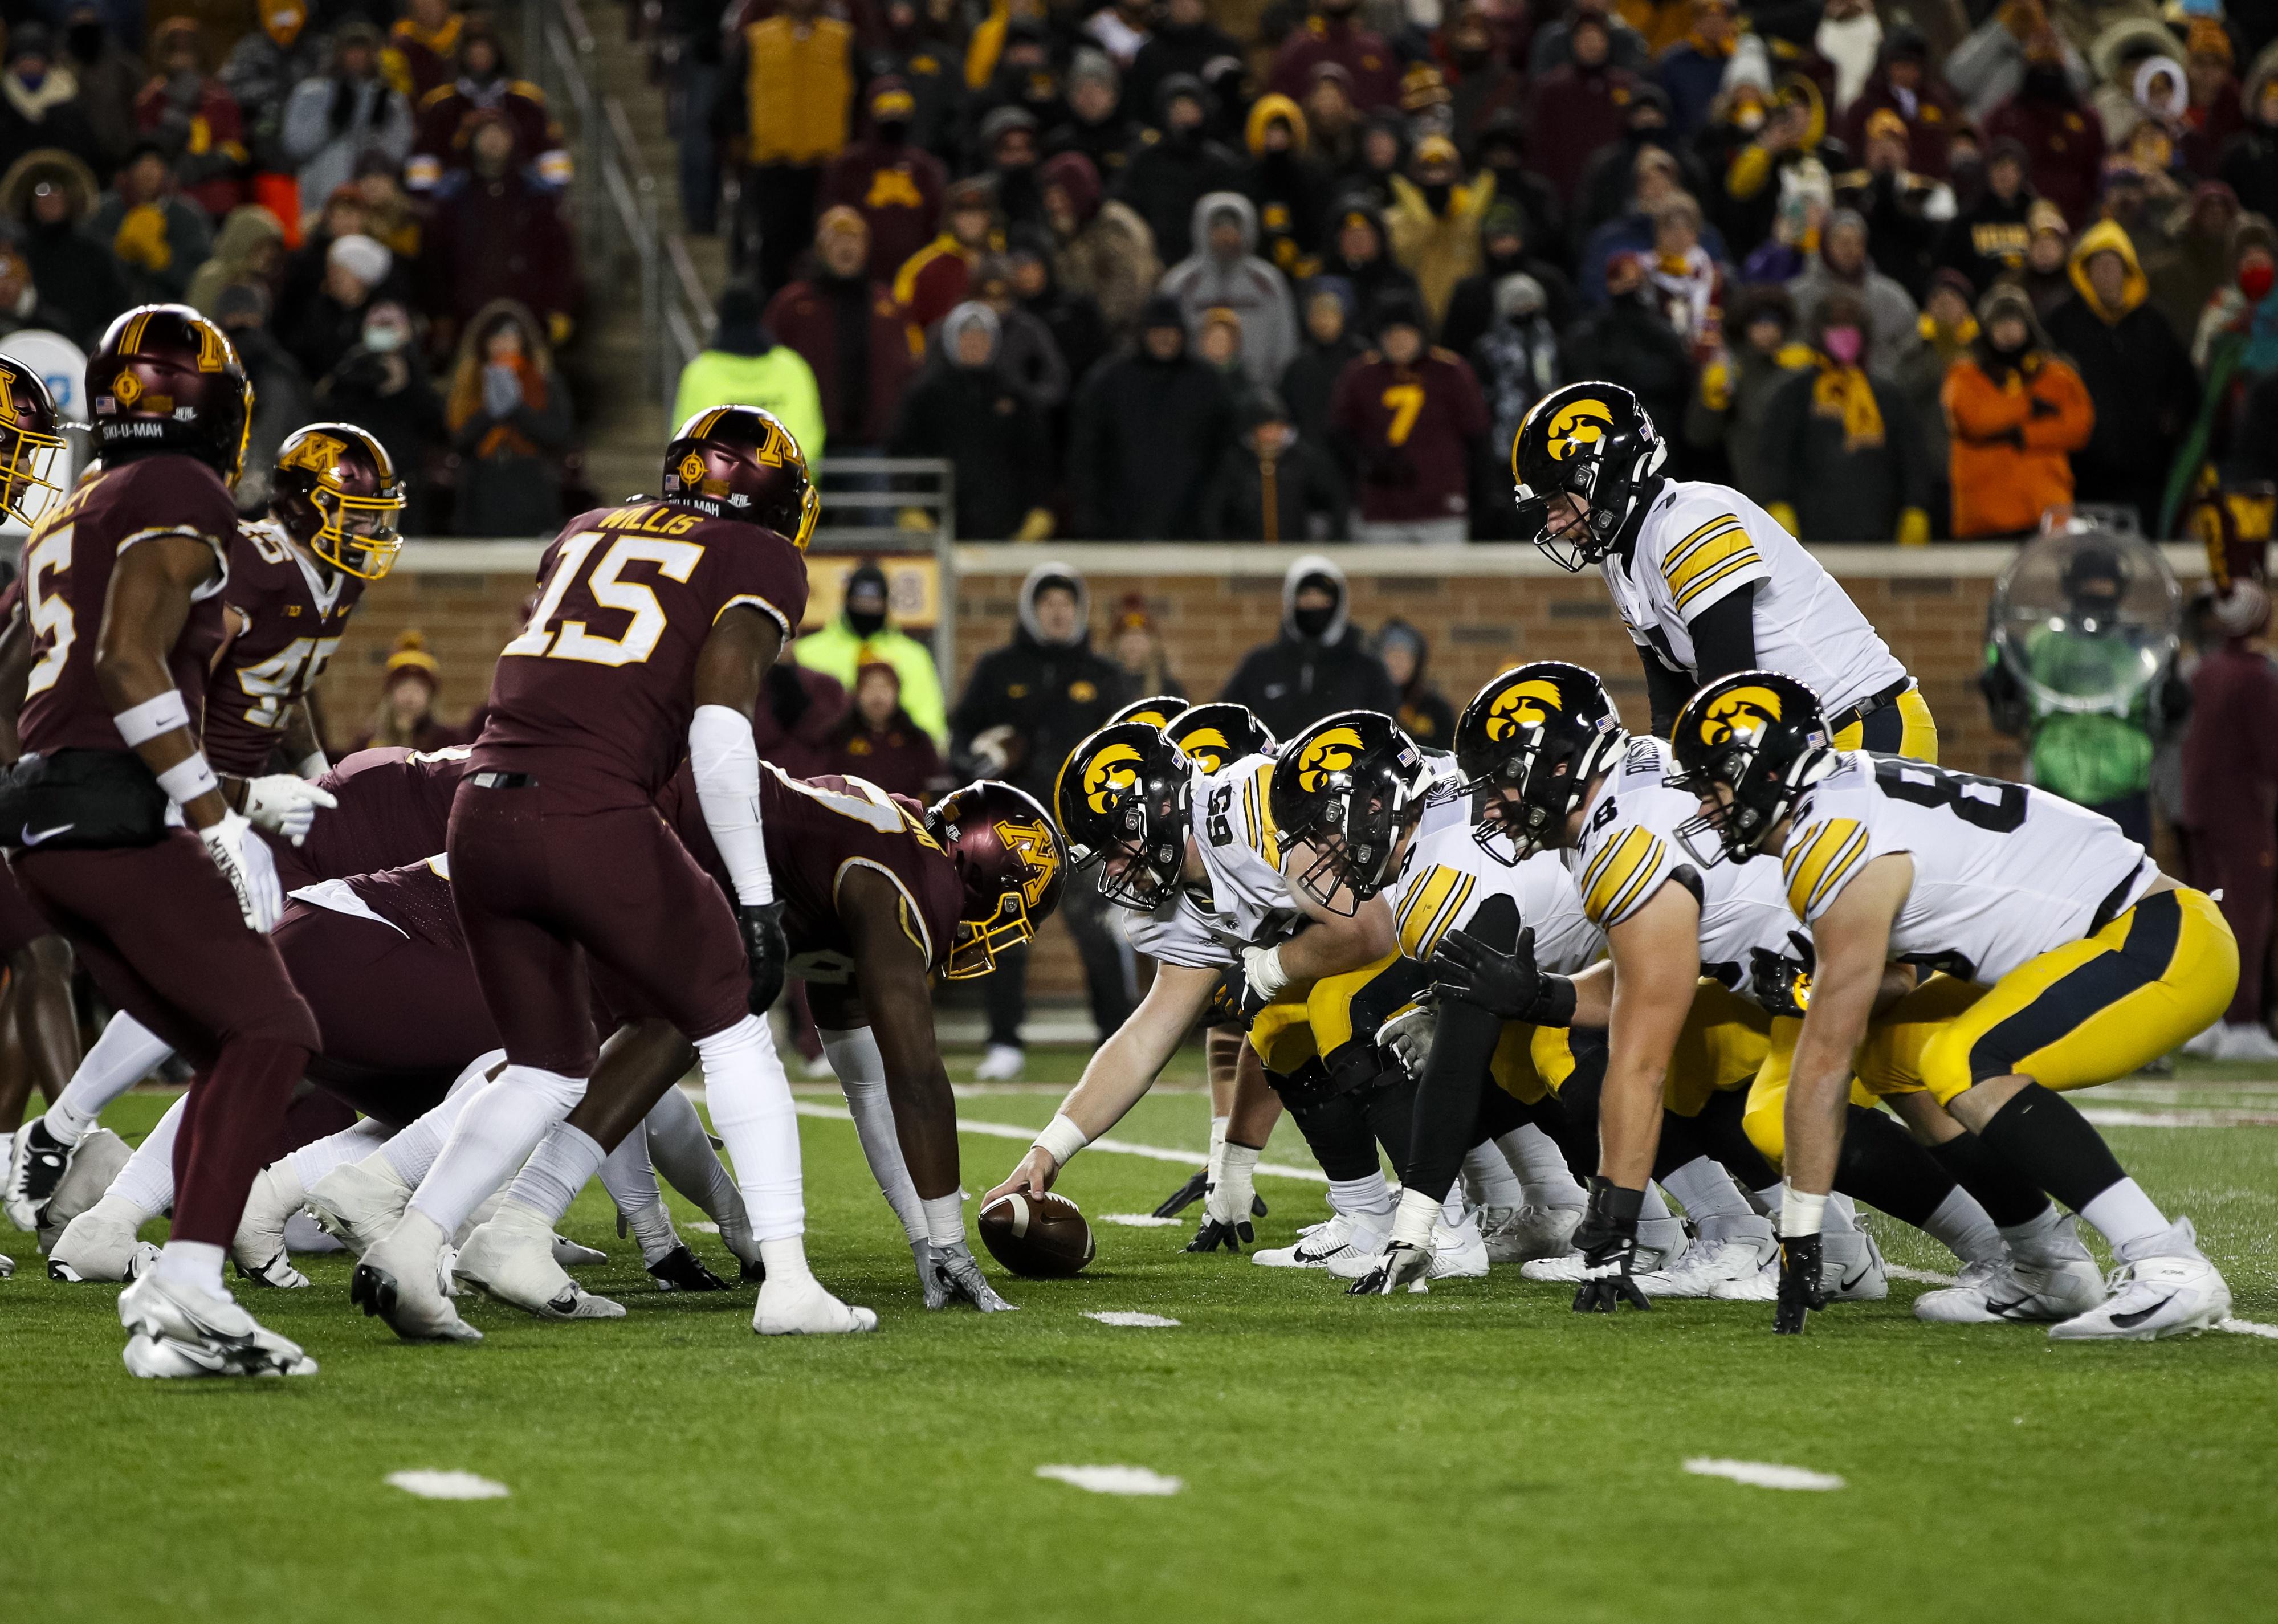 Members of the Iowa Hawkeyes and Minnesota Golden Gophers line up at the line of scrimmage.